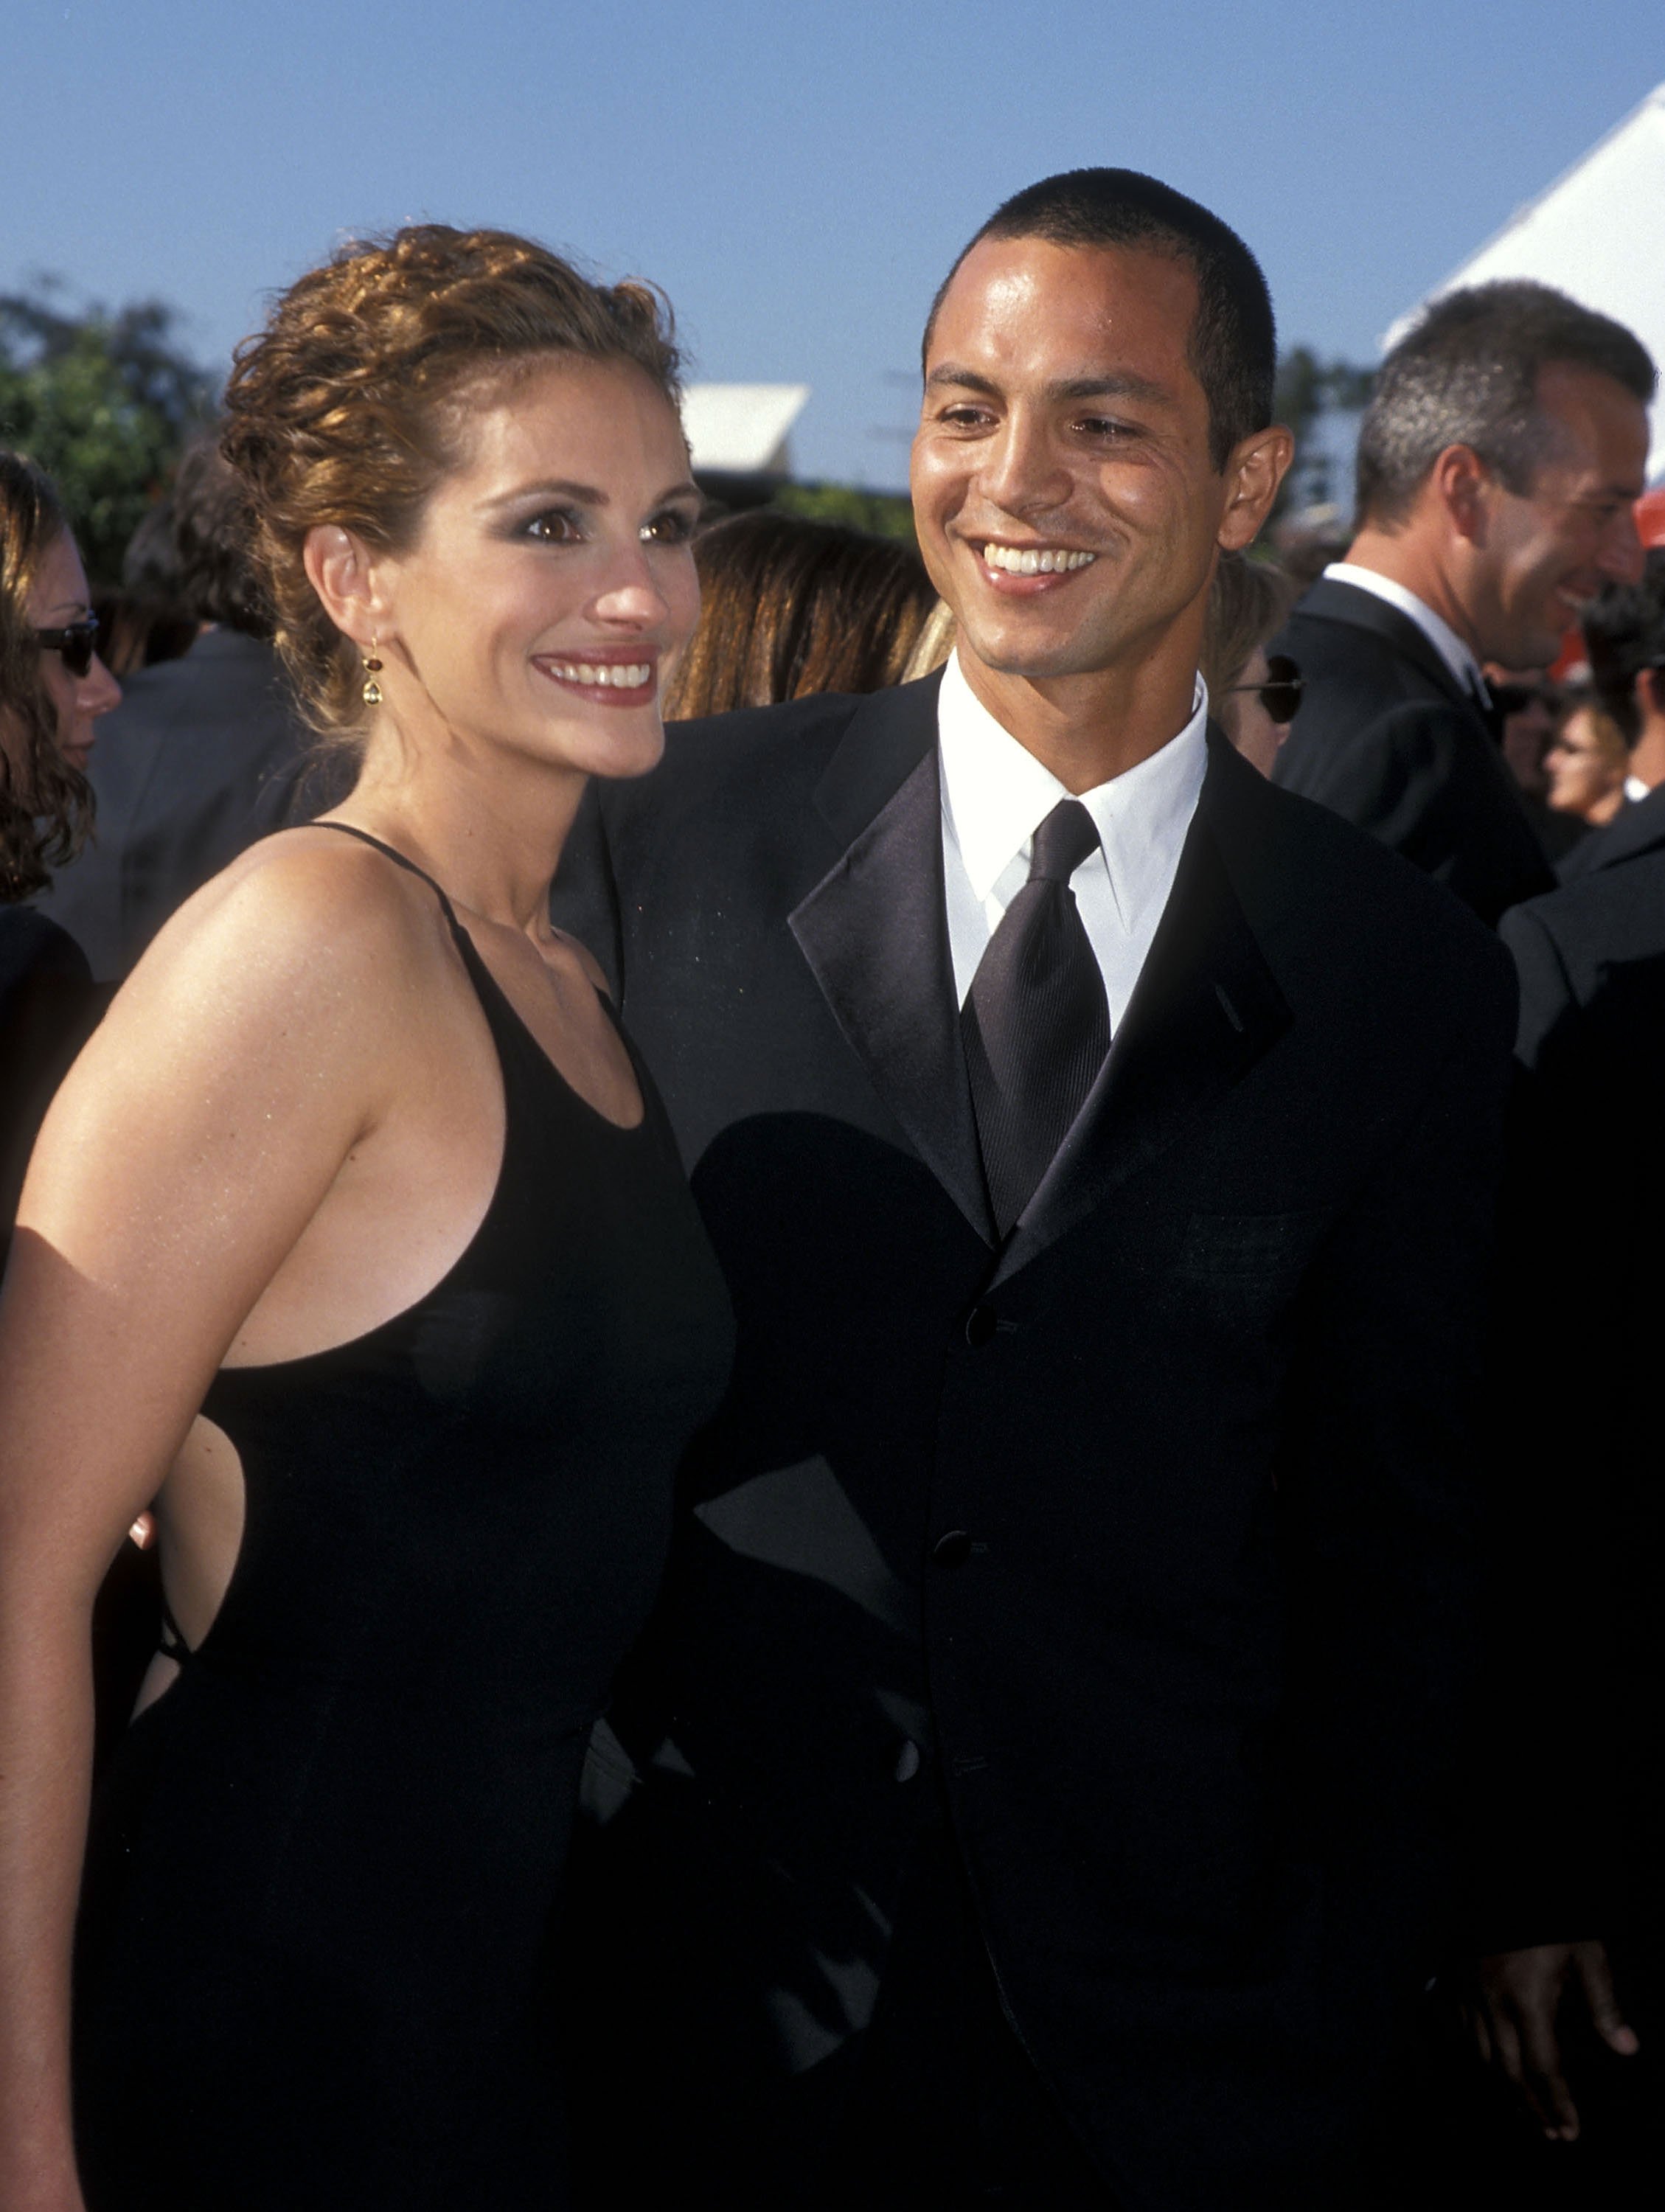 Actress Julia Roberts and actor Benjamin Bratt attend the 51st Annual Primetime Emmy Awards on September 12, 1999 at Shrine Auditorium in Los Angeles, California | Source: Getty Images